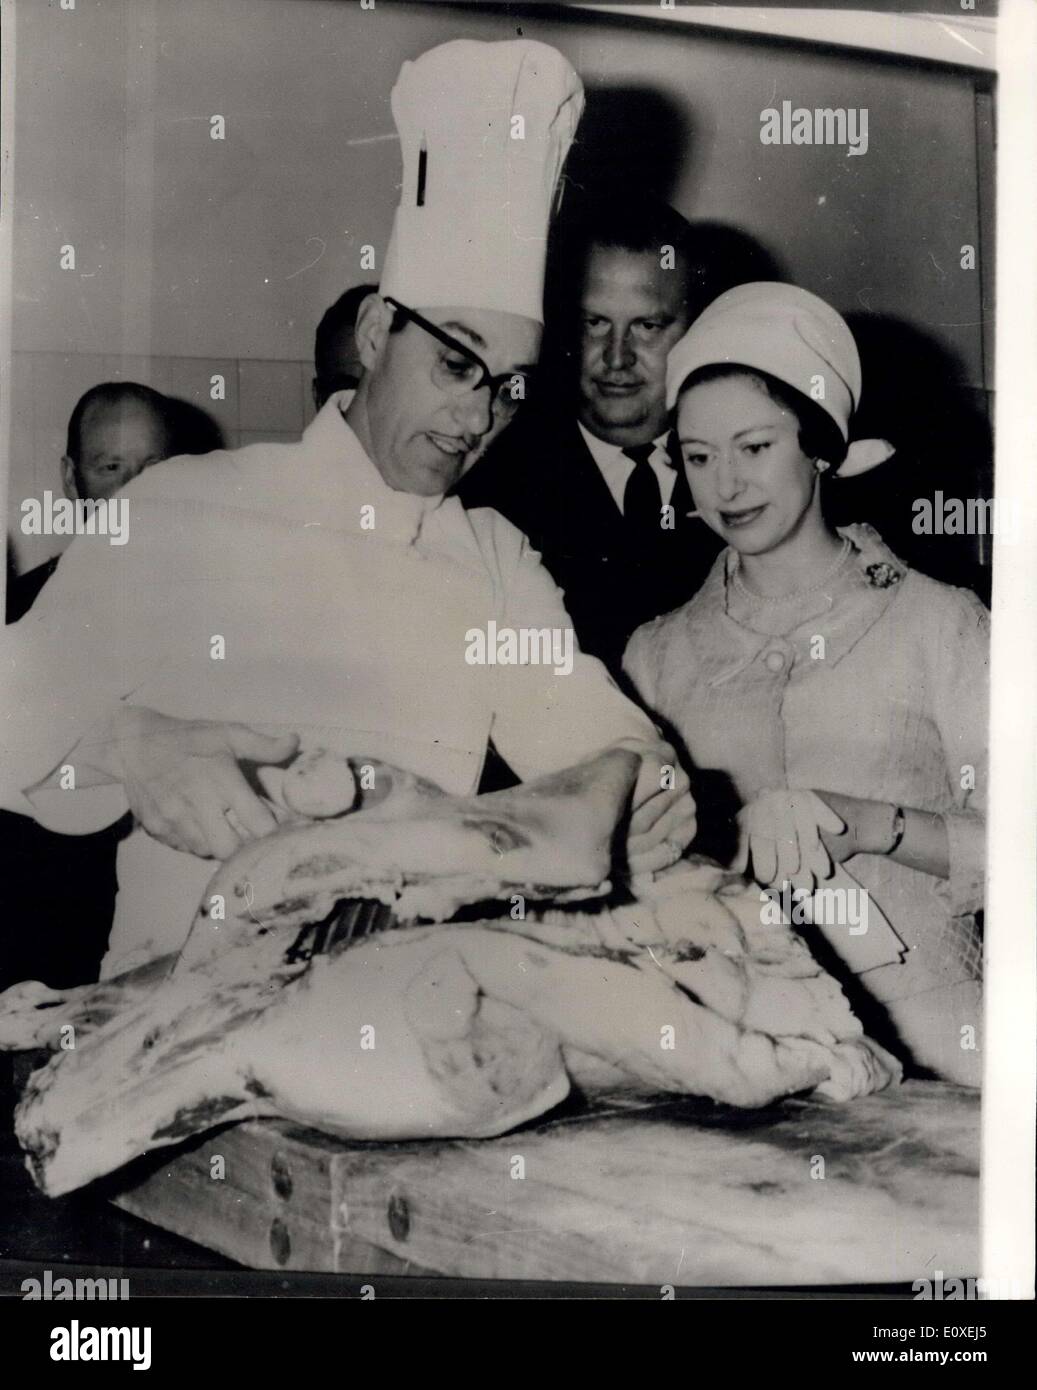 May 24, 1966 - Princess Margaret Opens The Rank Organisation's Give Bridges Hotel In Gateshead: Photo Shows Princess Margaret speaking in impeccable French to the head of the Five Bridges Hotel, Mr. A. Requier, of Bordeaux, France, as he explains the art of serving up a lamb's eareas. In the center looking on is Mr. Dowson of Rank Organisation. Mr. Requier was a member of the French Resistance. Stock Photo